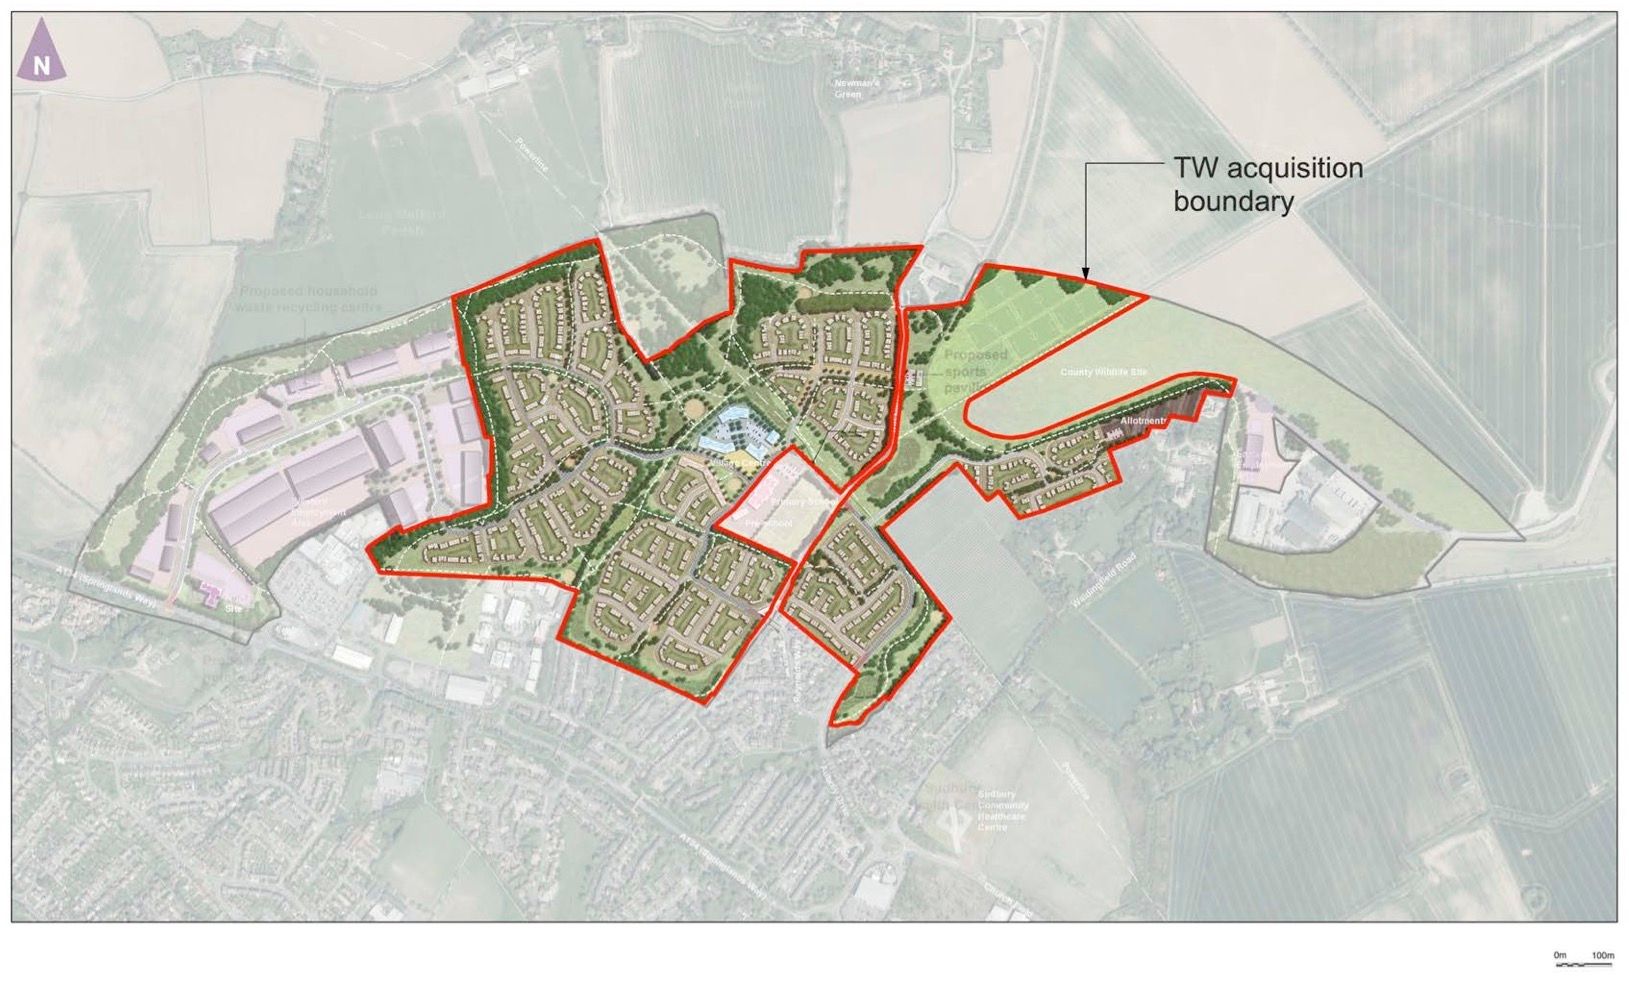 Suffolk County Council complete sale of Chilton Woods land to Taylor Wimpey 